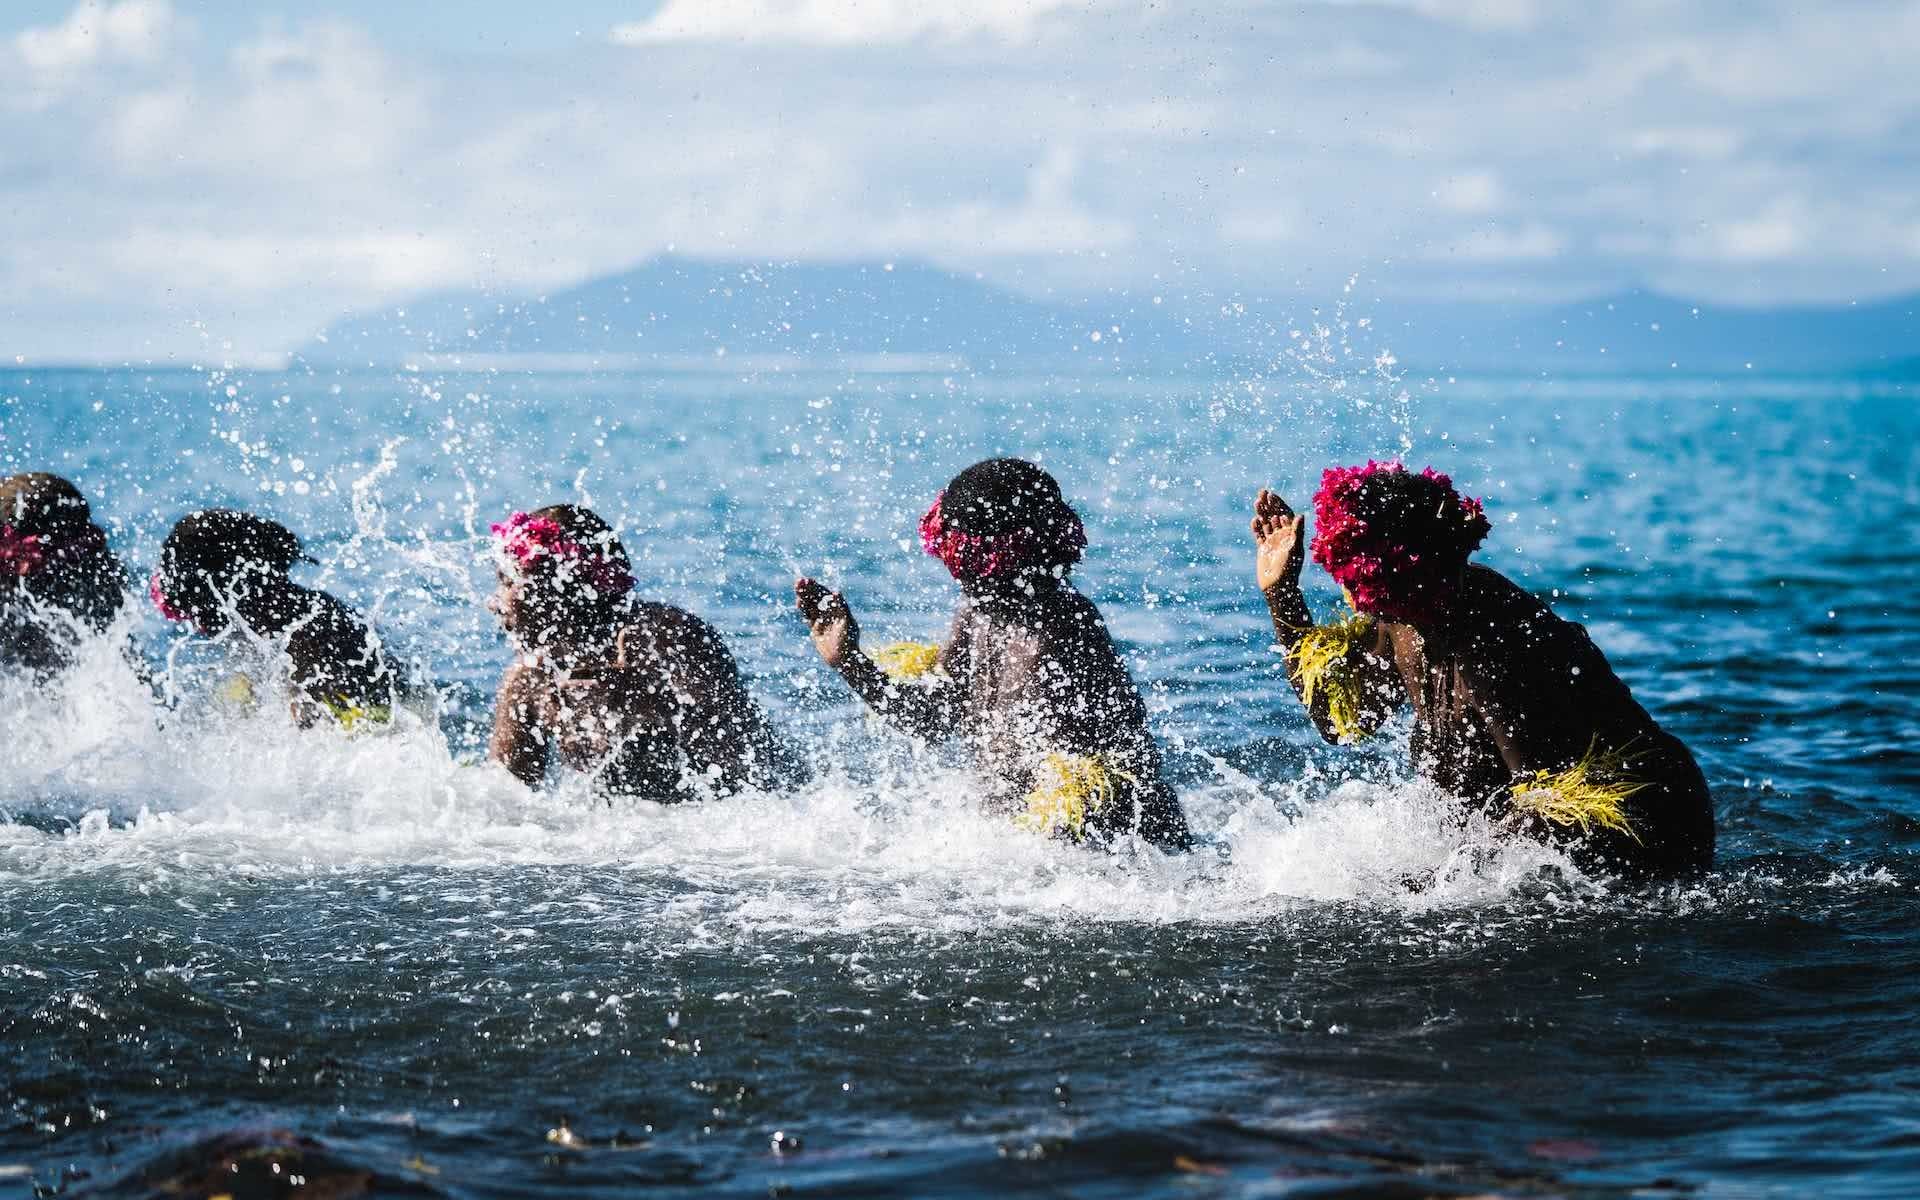 The Best Places to Stay in the Outer Islands of Vanuatu, photos by Ben Savage and Ain Raadik, Ruby Claire, Gaua, Ladies water dance, water music, women, dancing, ocean